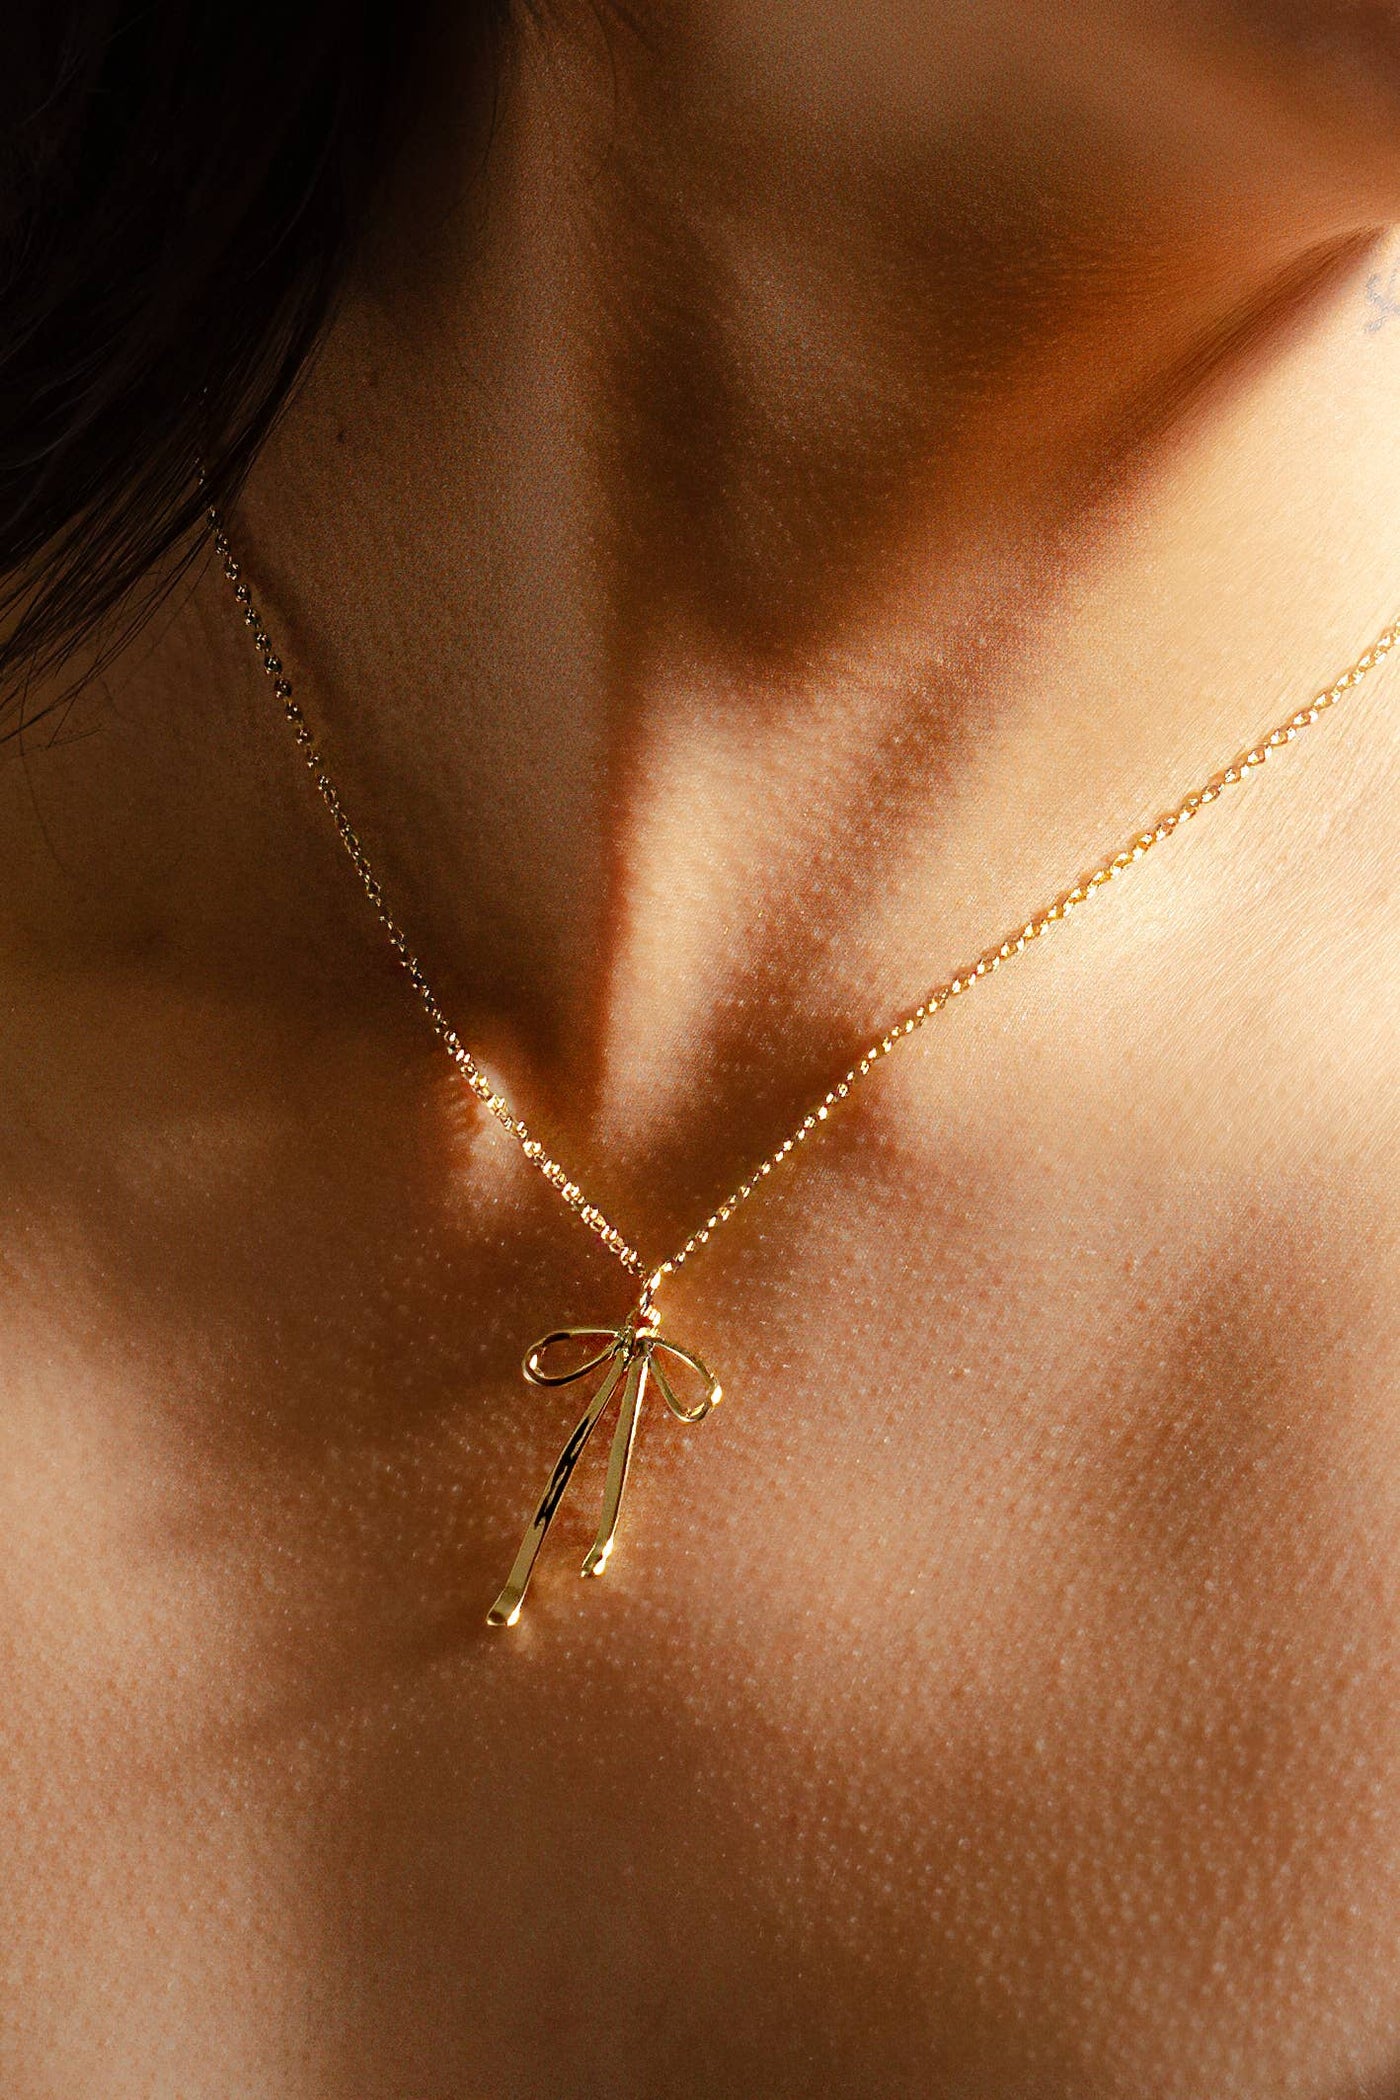 Bad to the Bow Necklace - 18K Gold Plated Necklace